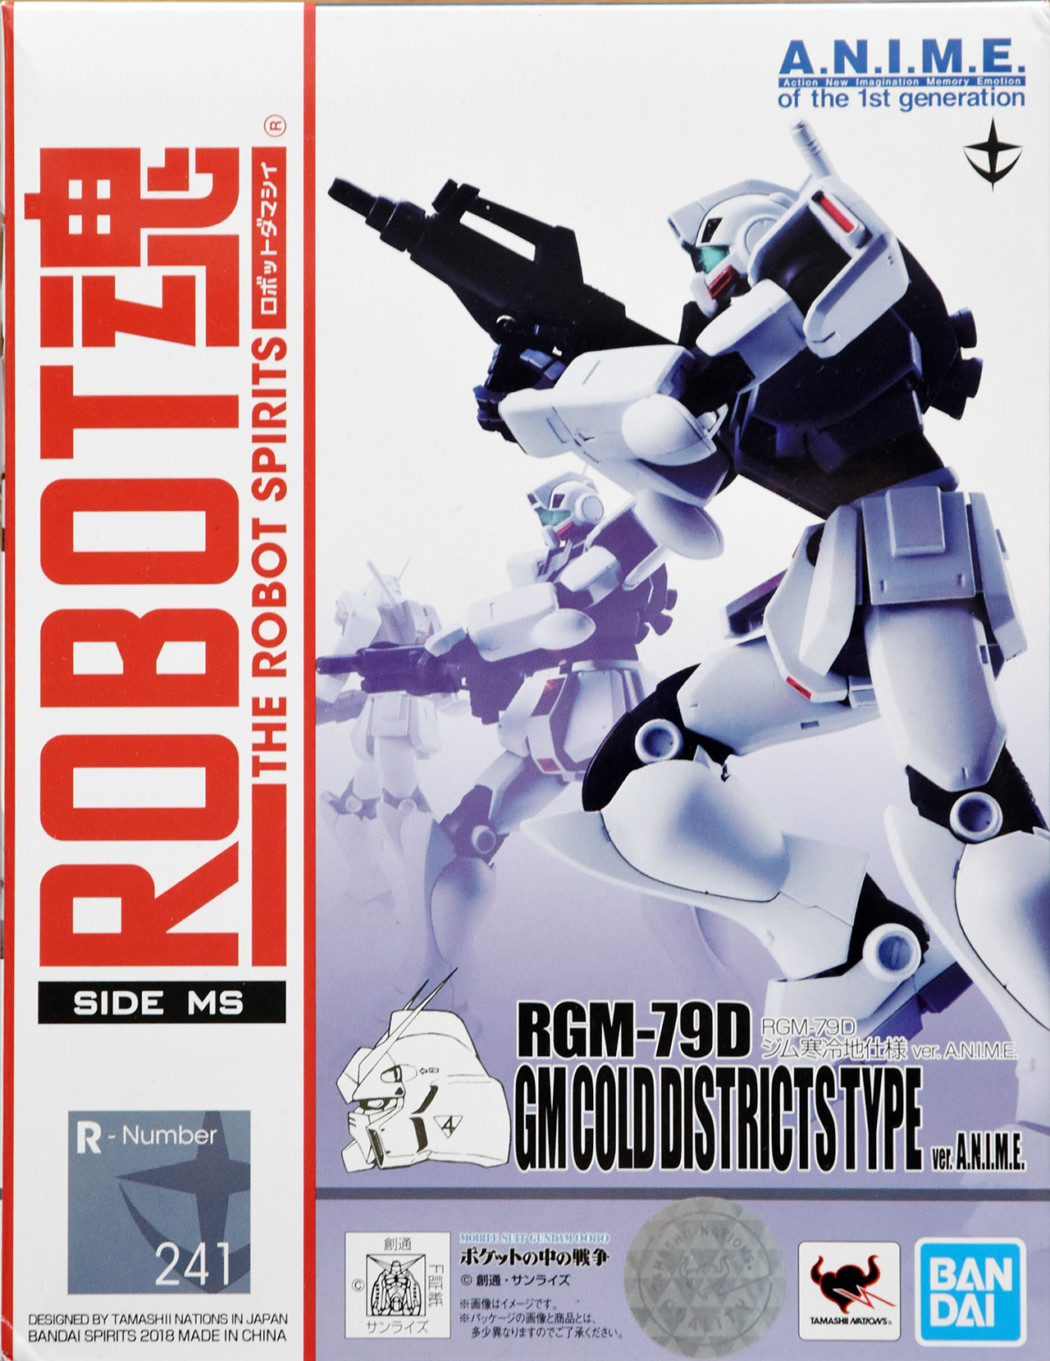 Robot Damashii RGM-79D GM Cold Districts Type ver. A.N.I.M.E. by Bandai (Part 1: Unbox)